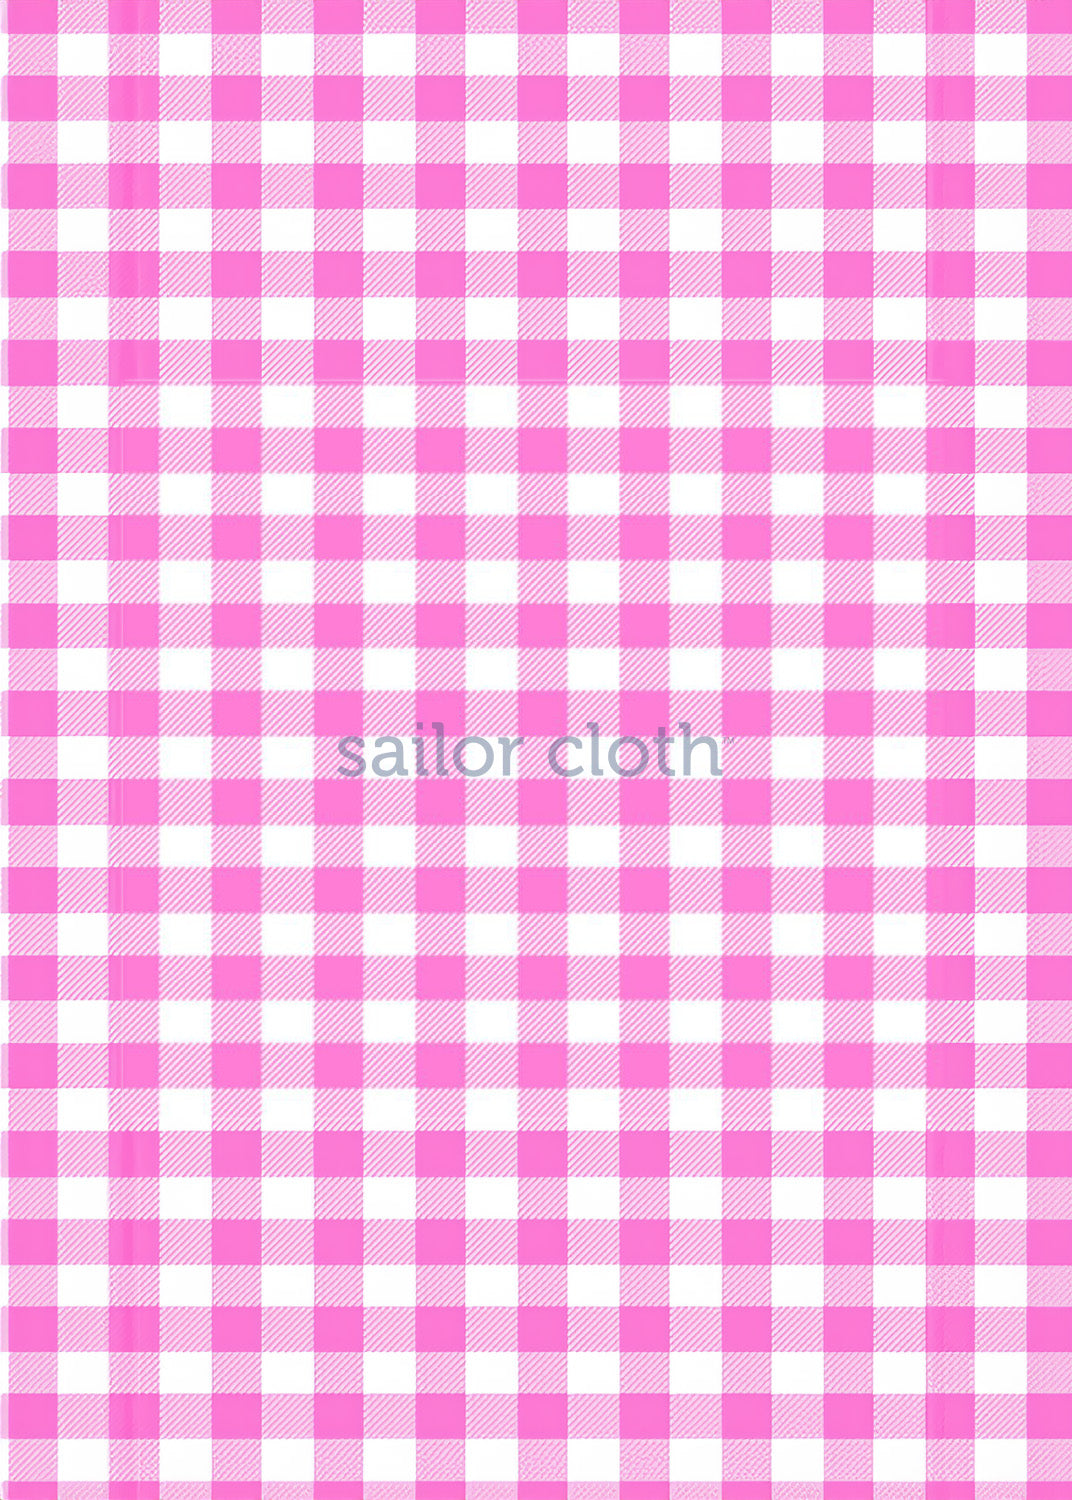 Country Club Skort with Ruffle 17"  - Gingham Hot Pink/White